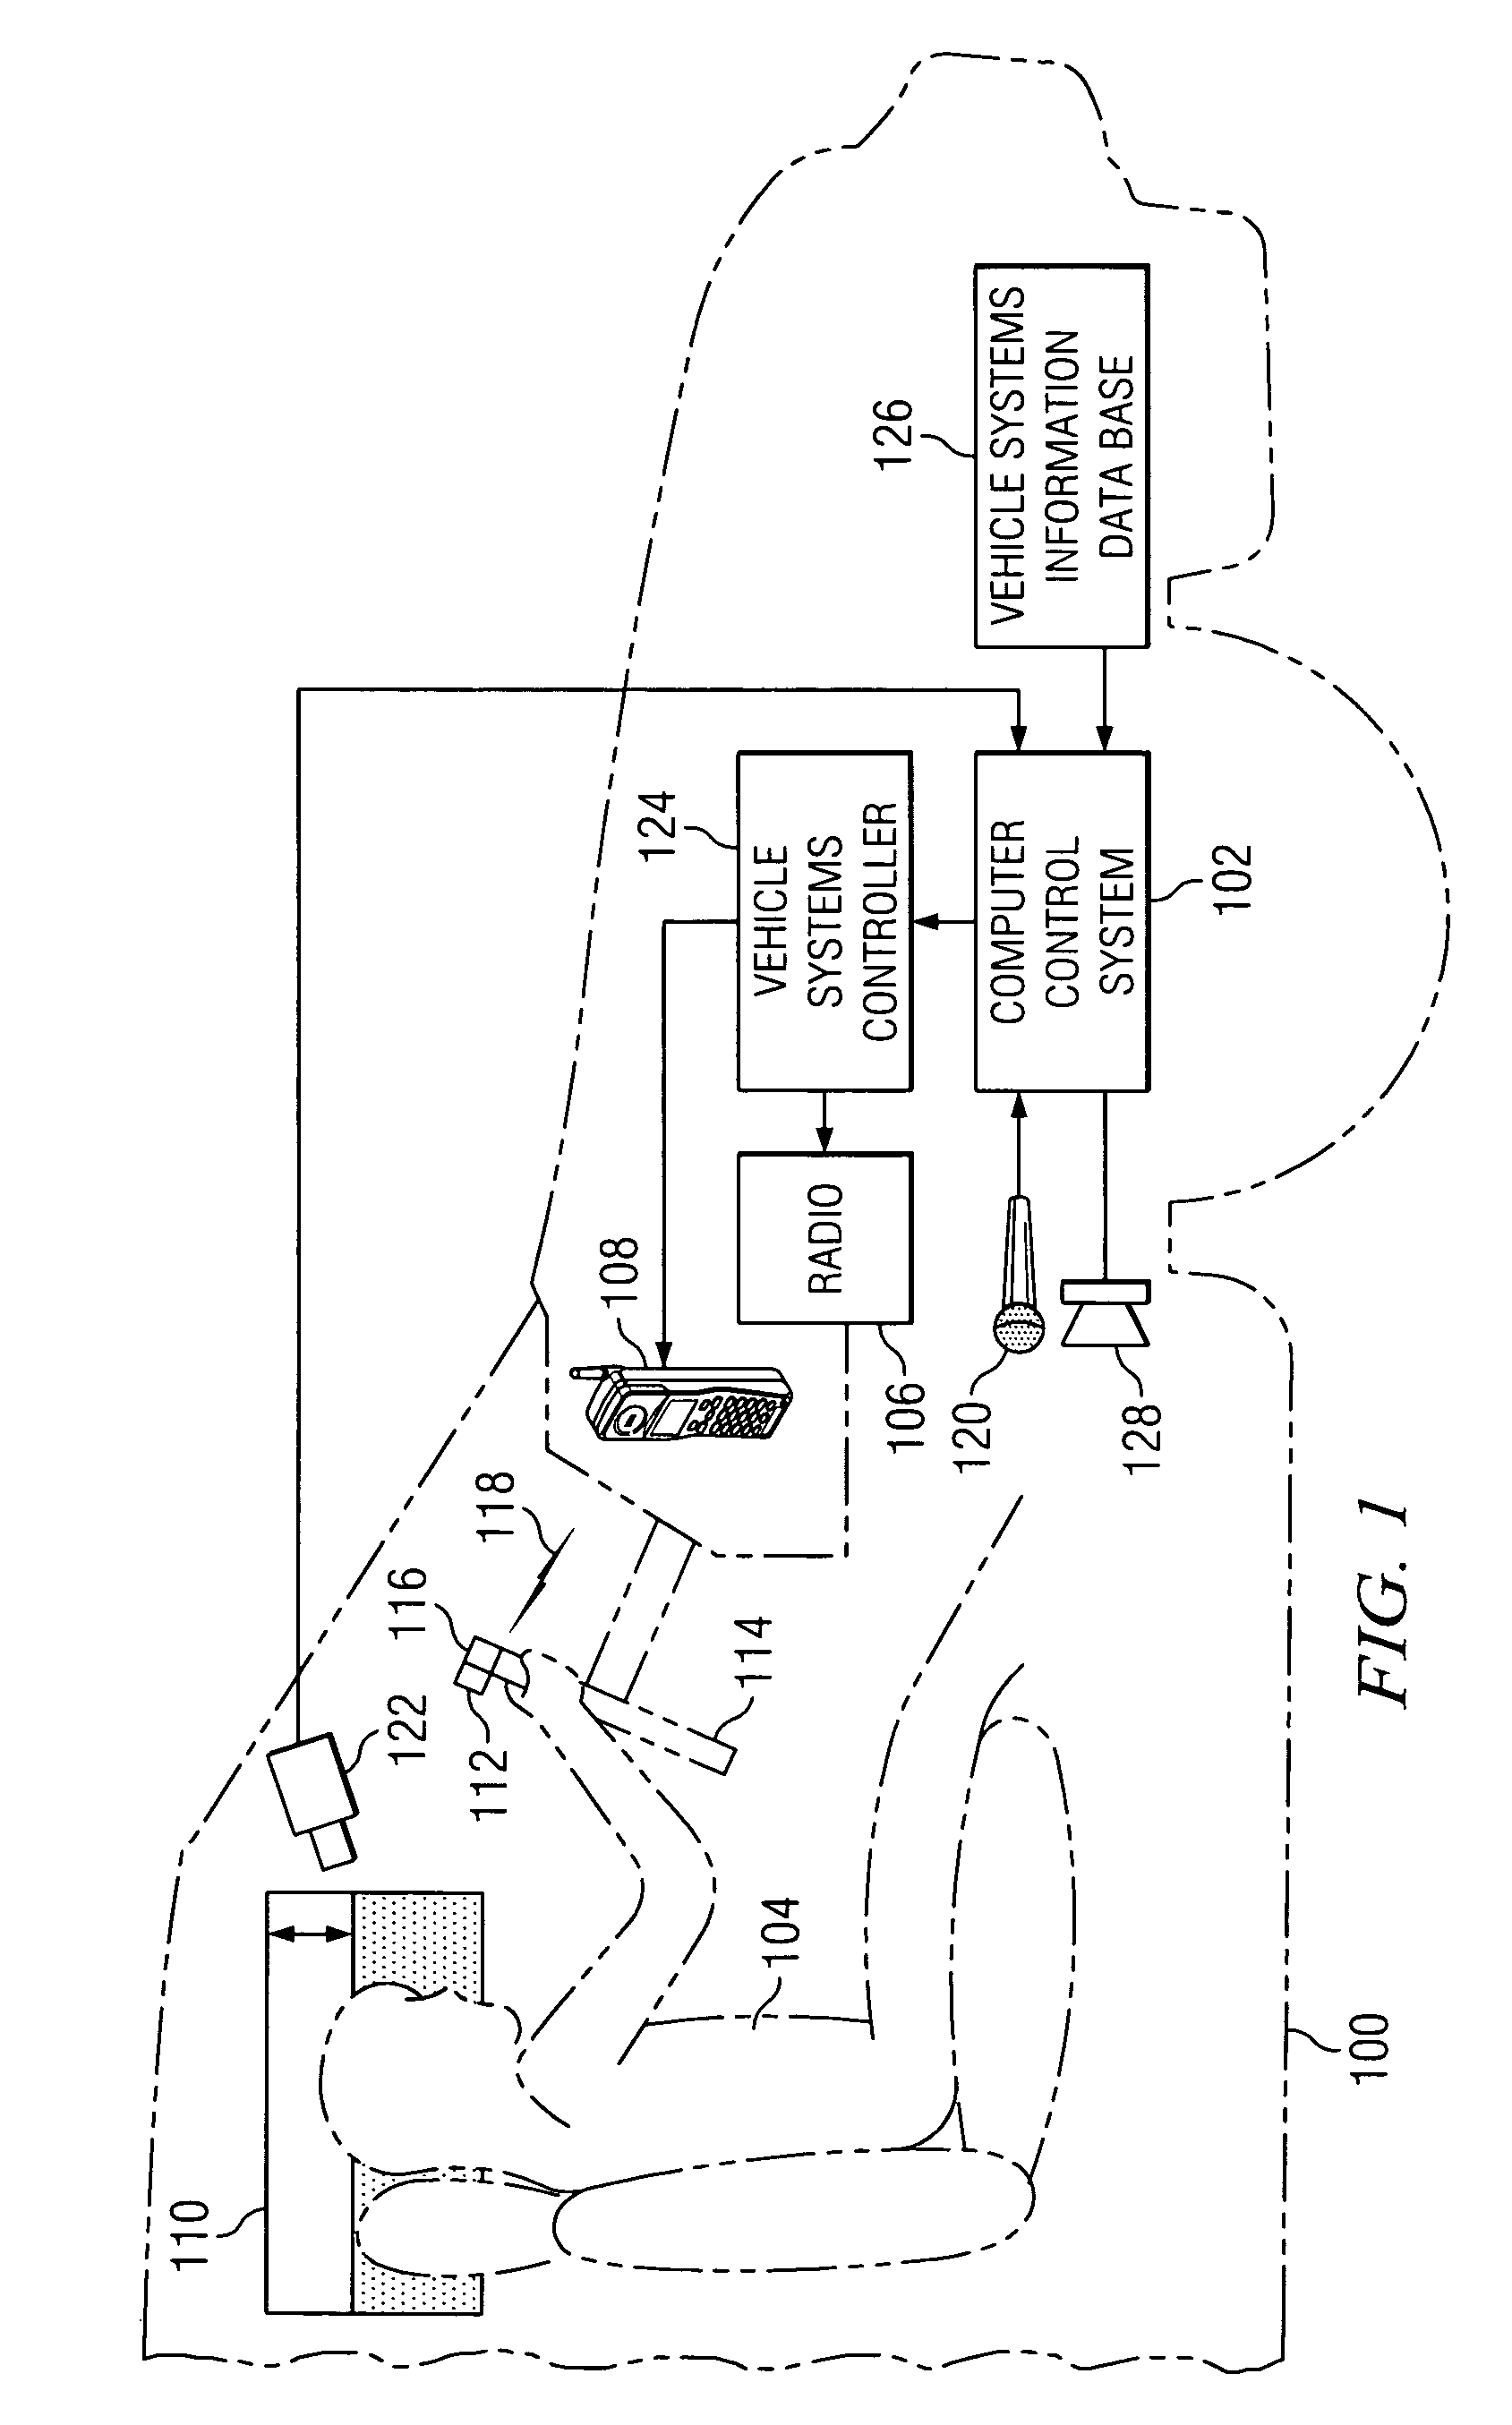 Touch gesture based interface for motor vehicle